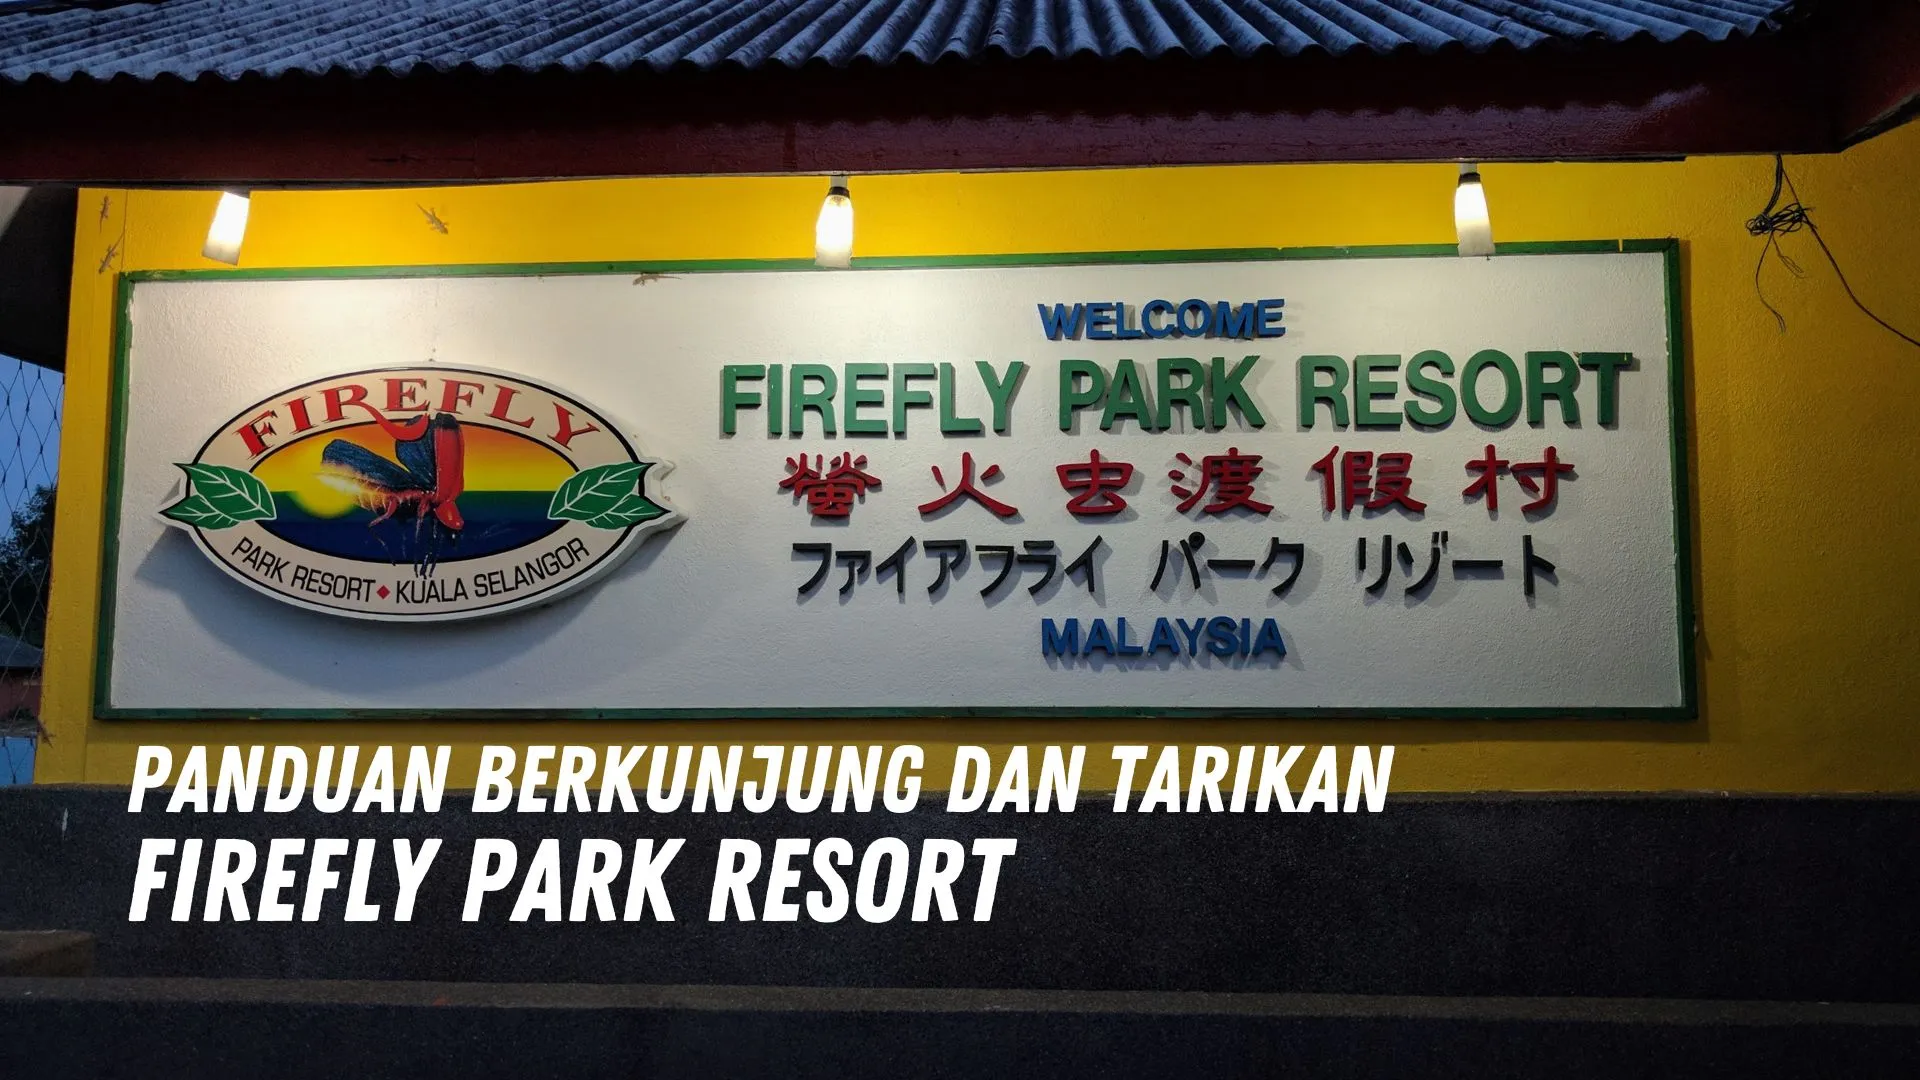 Review Firefly Park Resort Malaysia